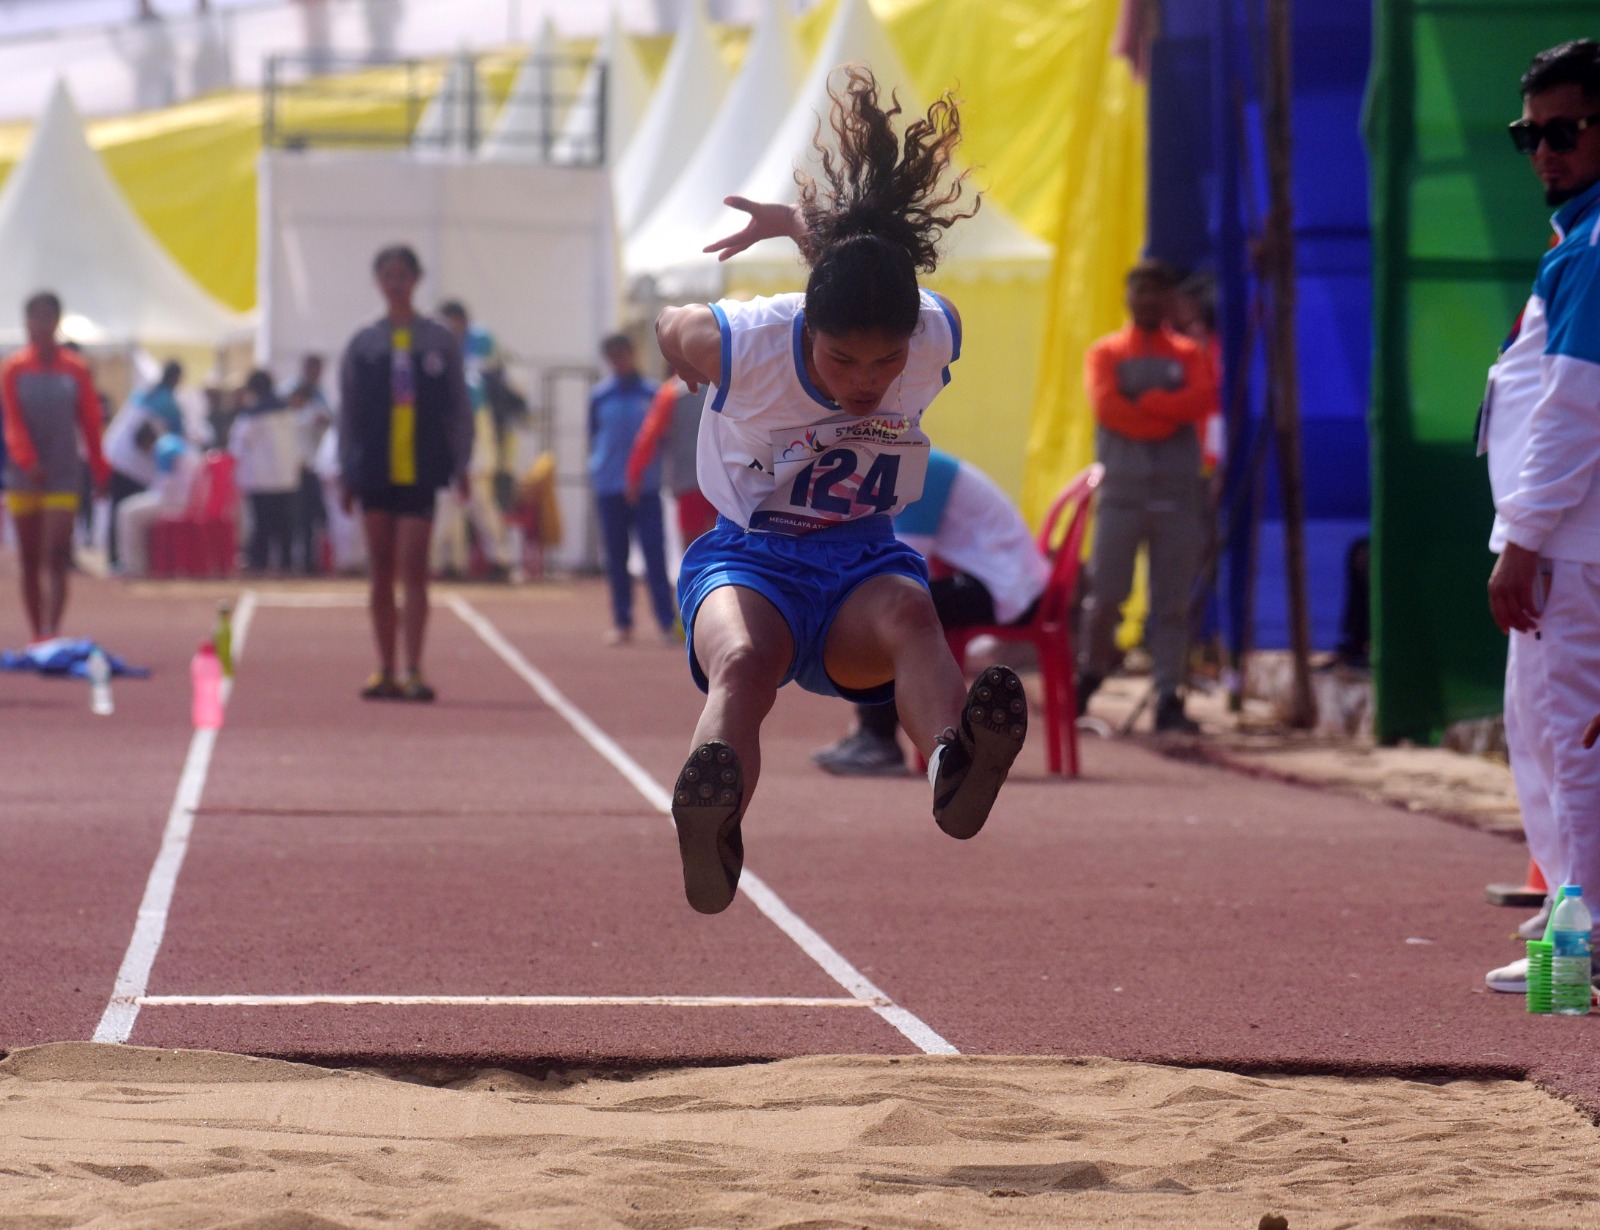 IN PICS |5th Meghalaya Games | Afternoon update | Visuals from Men & Women 4x100m relay race, Long Jump, Archery